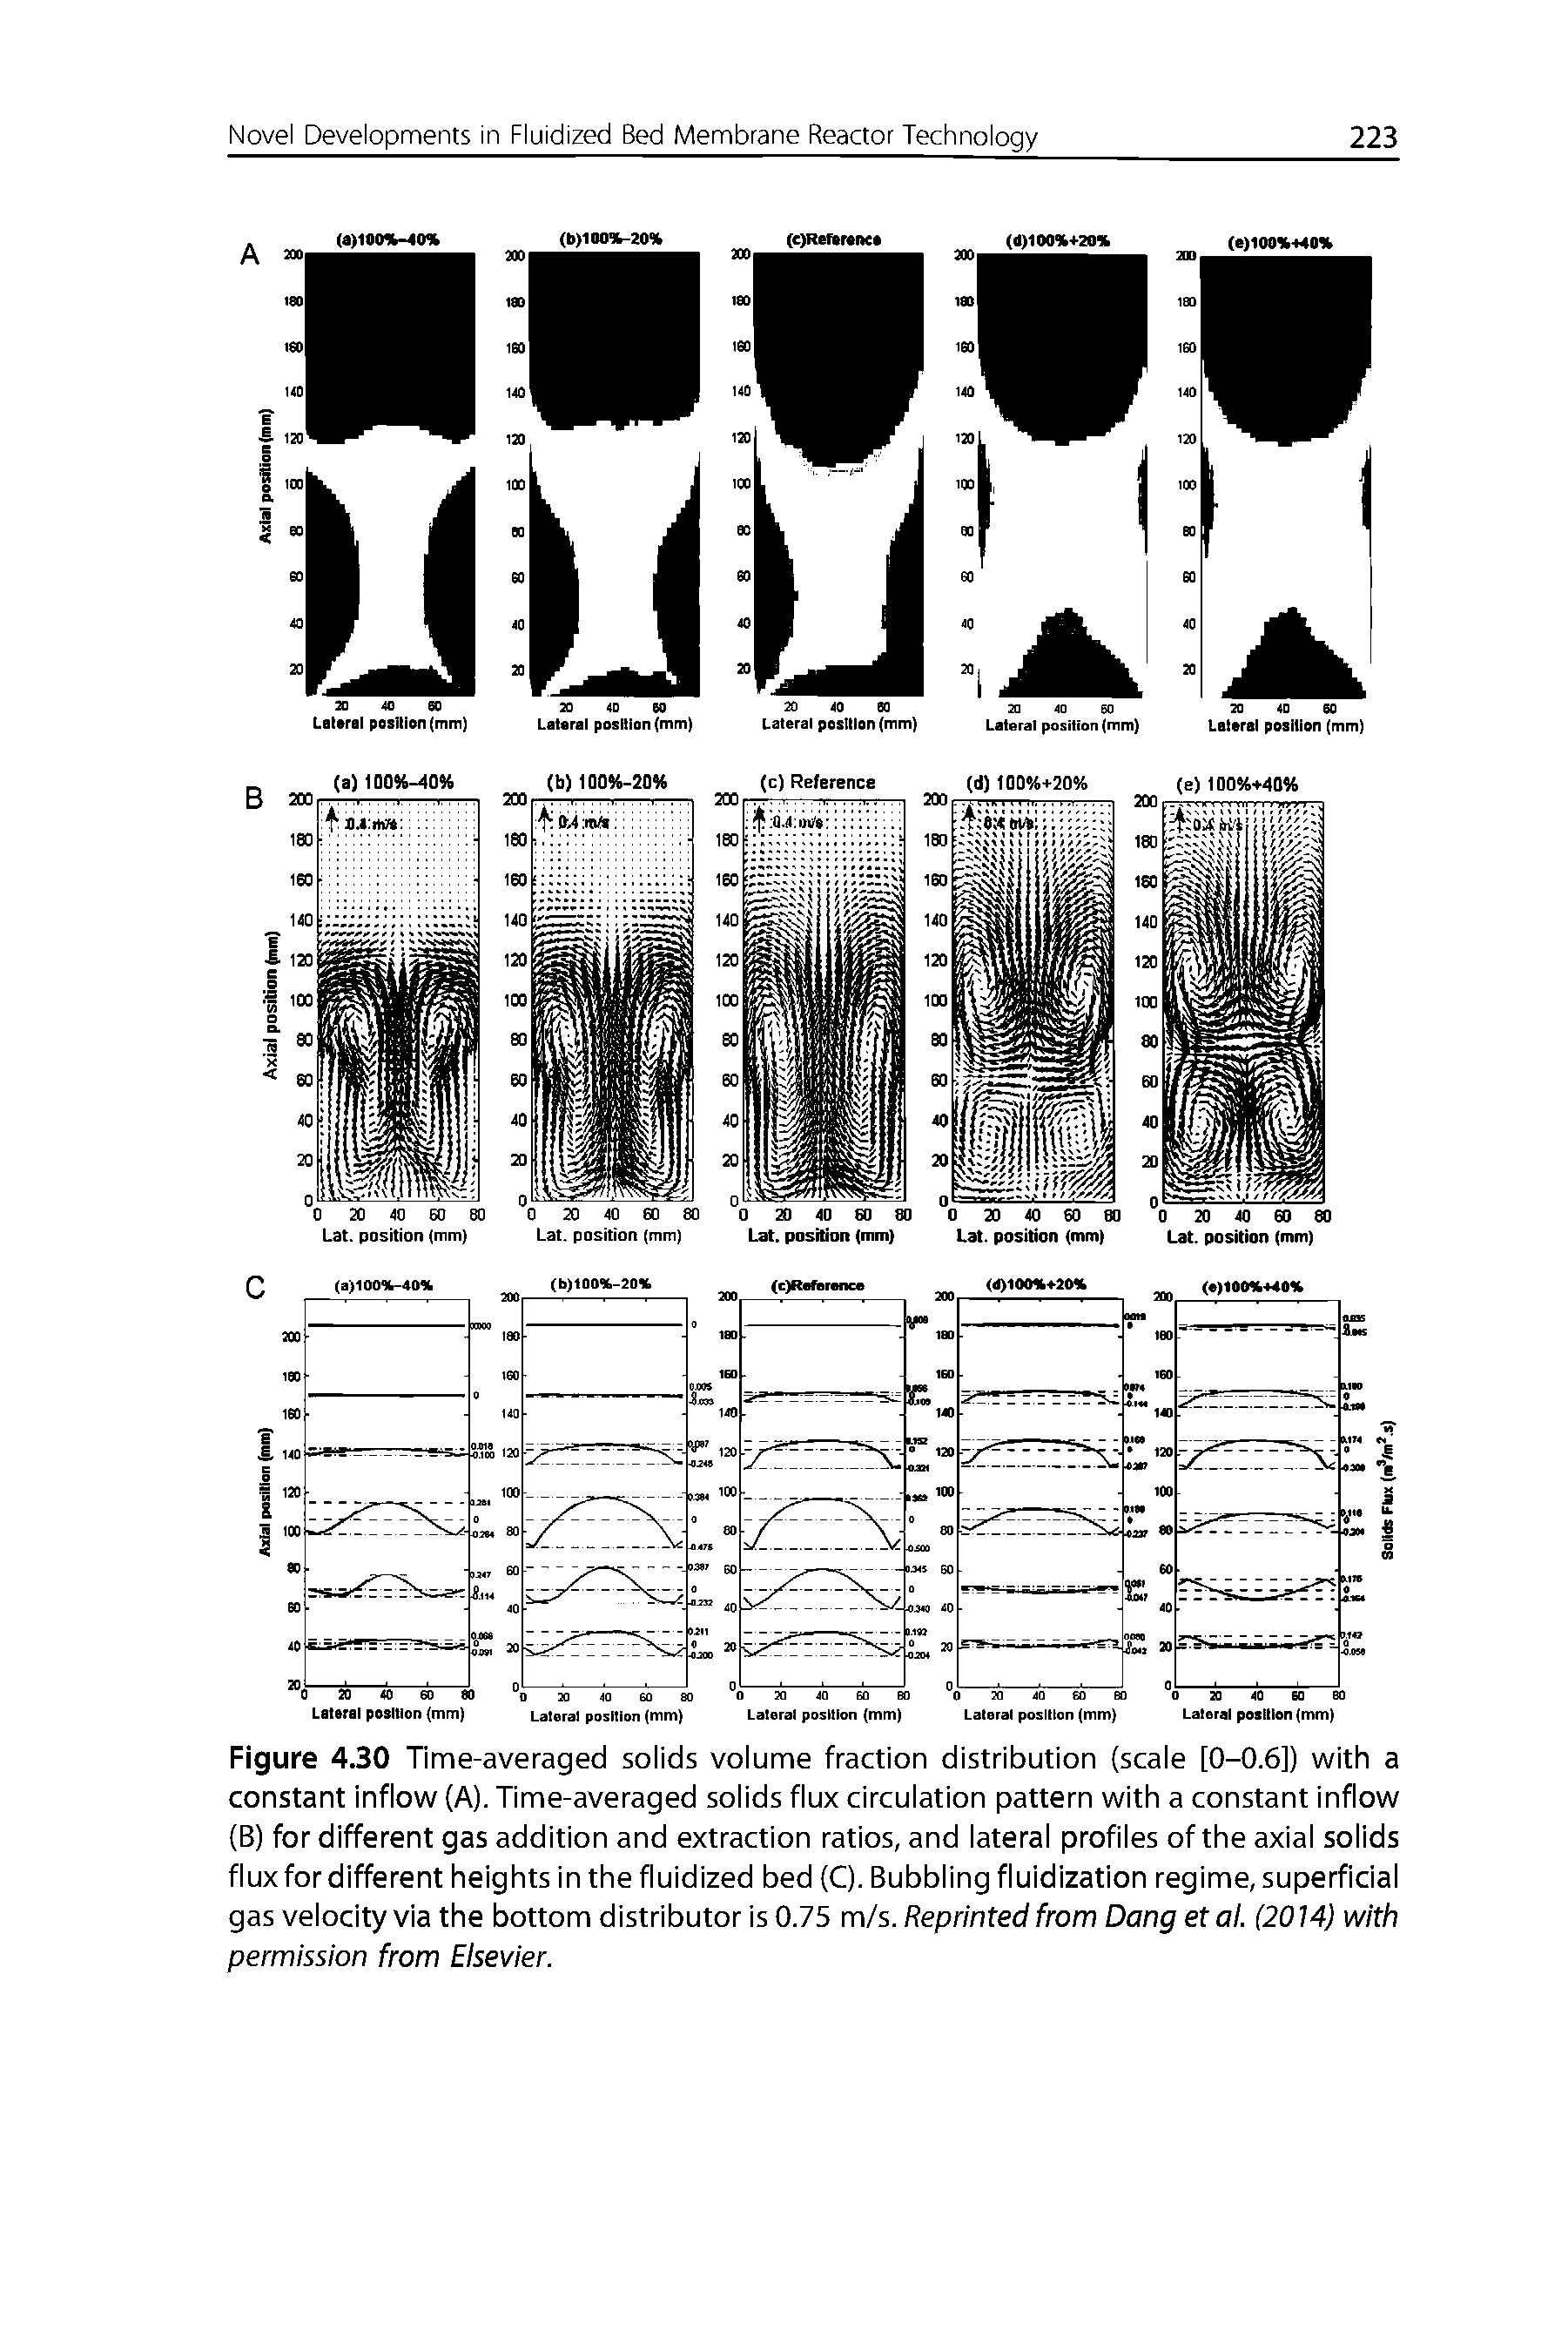 Figure 430 Time-averaged solids volume fraction distribution (scale [0-0.6]) with a constant inflow (A). Time-averaged solids flux circulation pattern with a constant inflow (B) for different gas addition and extraction ratios, and lateral profiles of the axial solids flux for different heights in the fluidized bed (C). Bubbling fluidization regime, superficial gas velocity via the bottom distributor is 0.75 m/s. Reprinted from Dang etal. (2014) with permission from Elsevier.